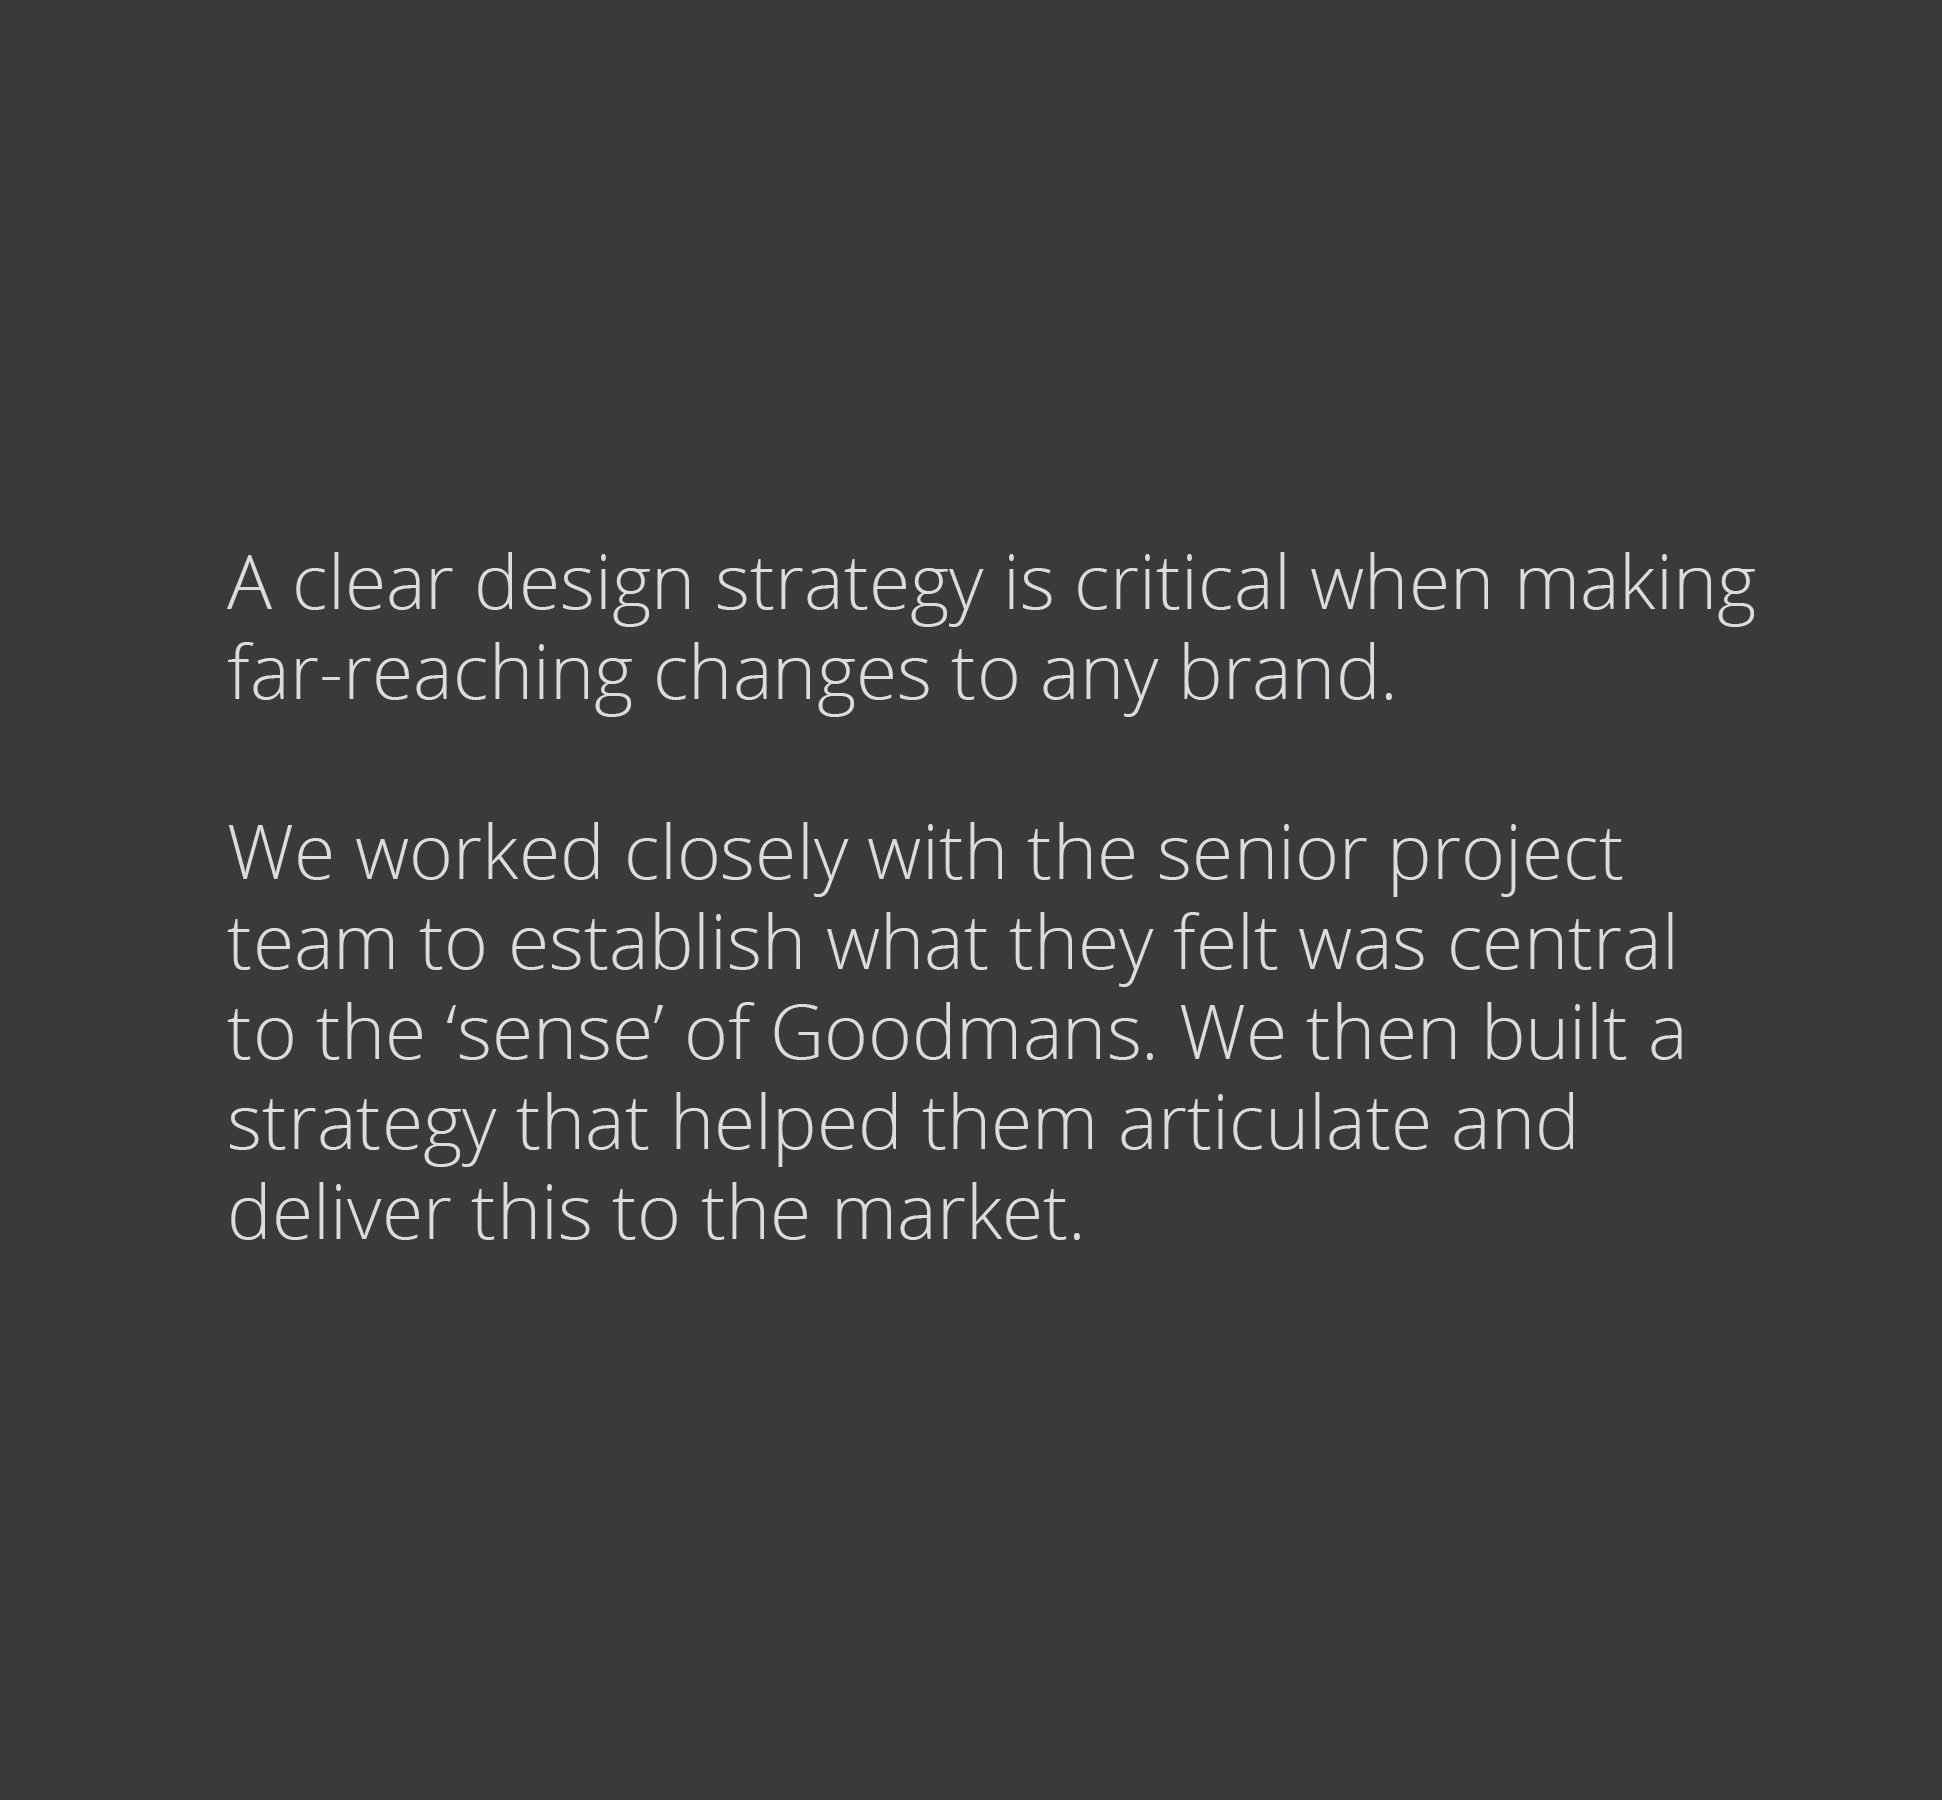 A clear design strategy is critical when making far-reaching changes to any brand